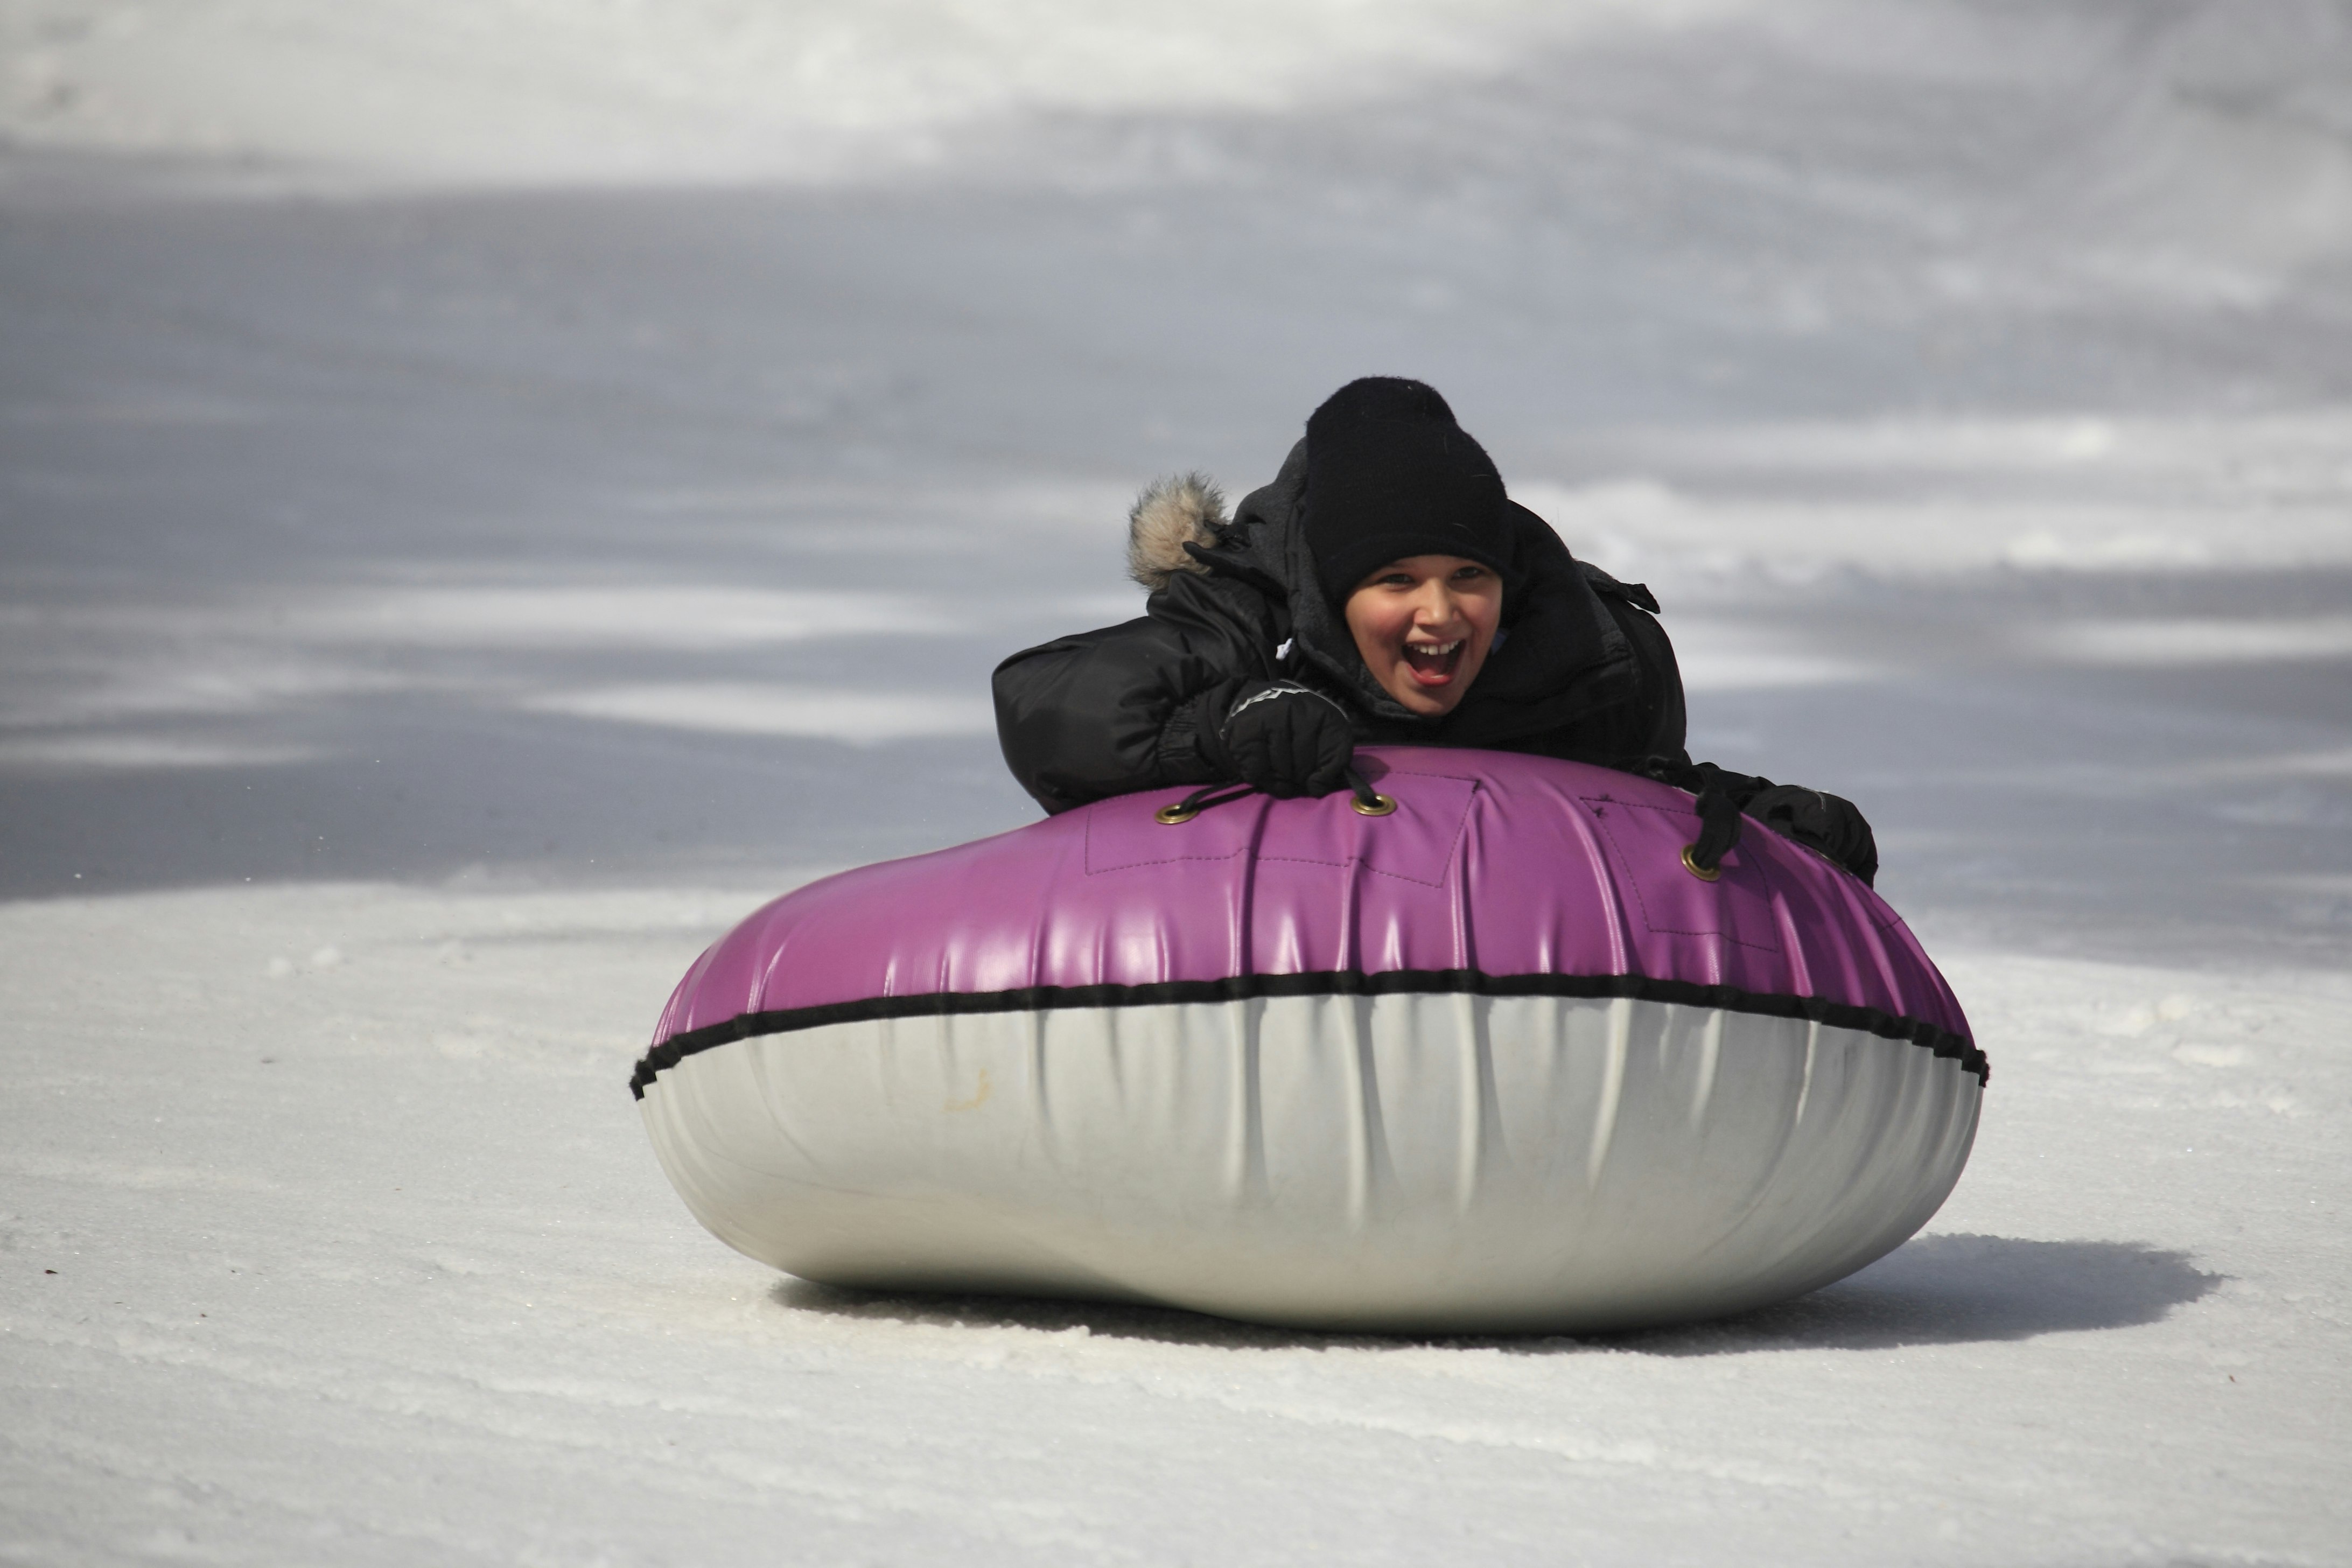 Girl on inner tube rides down a snow-packed slope